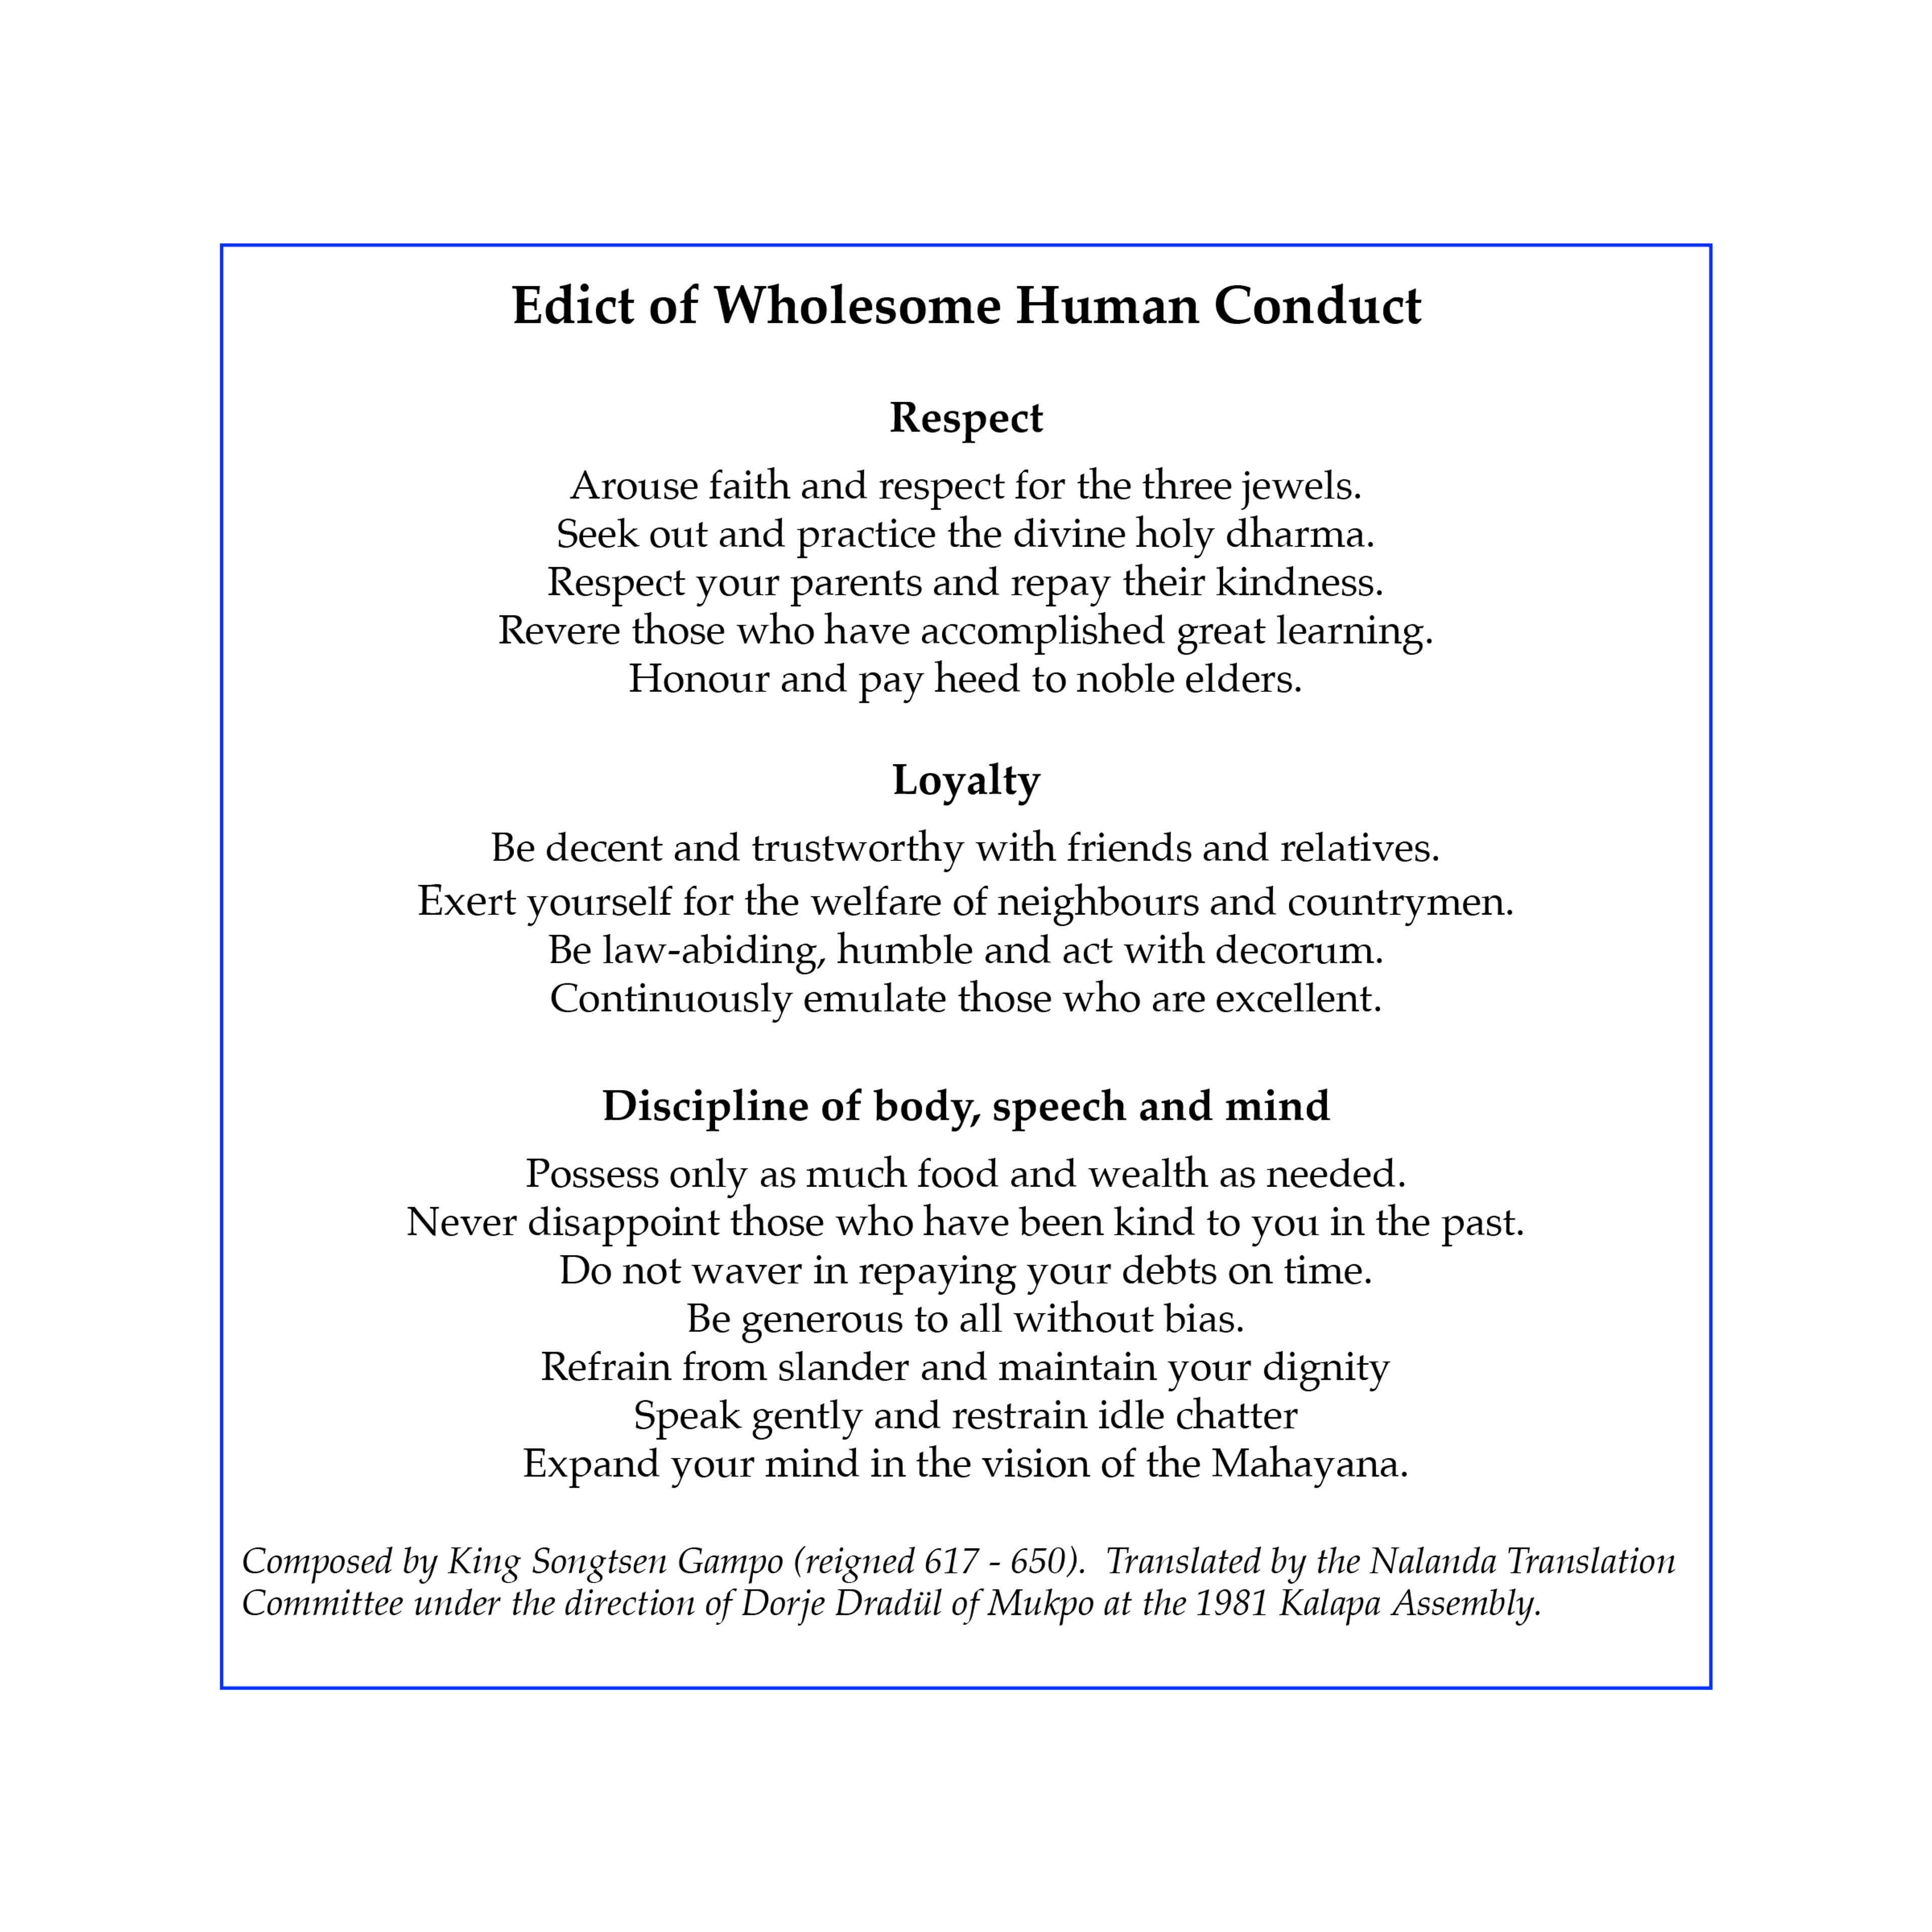 Edict of Wholesome Human Conduct